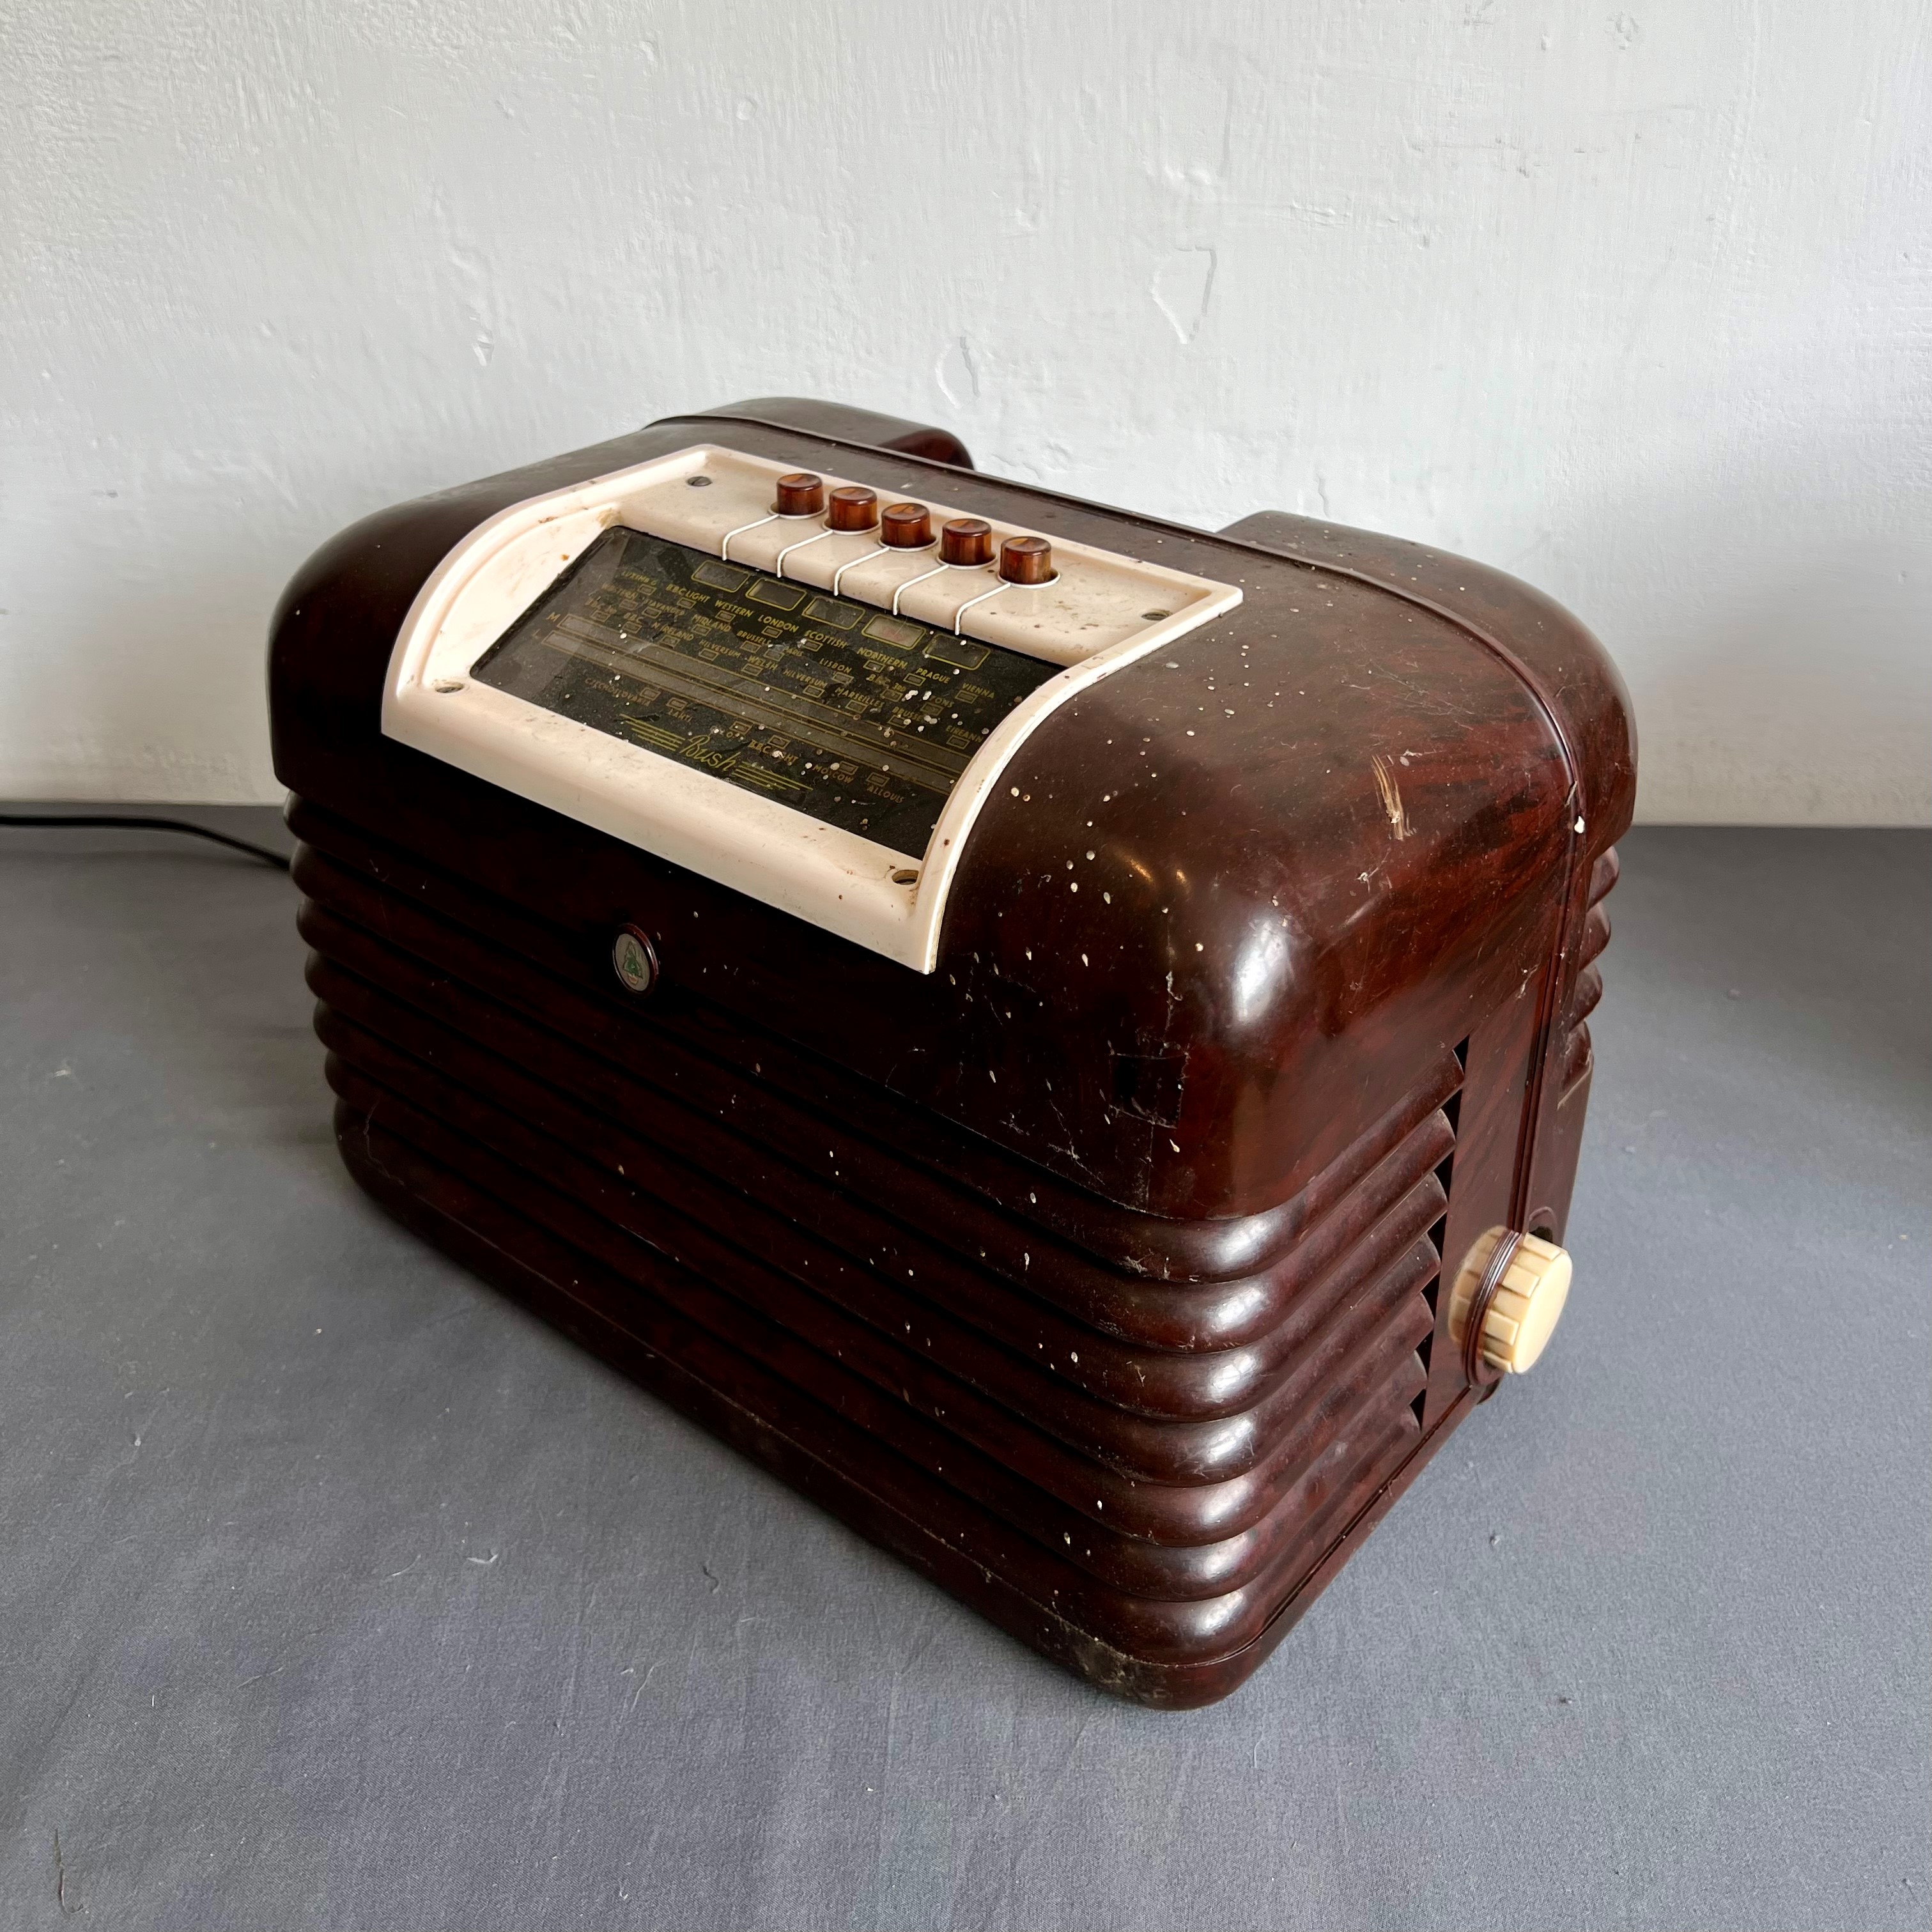 Two Bush bakelite radios - 1950s, comprising a DAC 90A and a DAC 10, both with brown bakelite cases, - Image 5 of 8